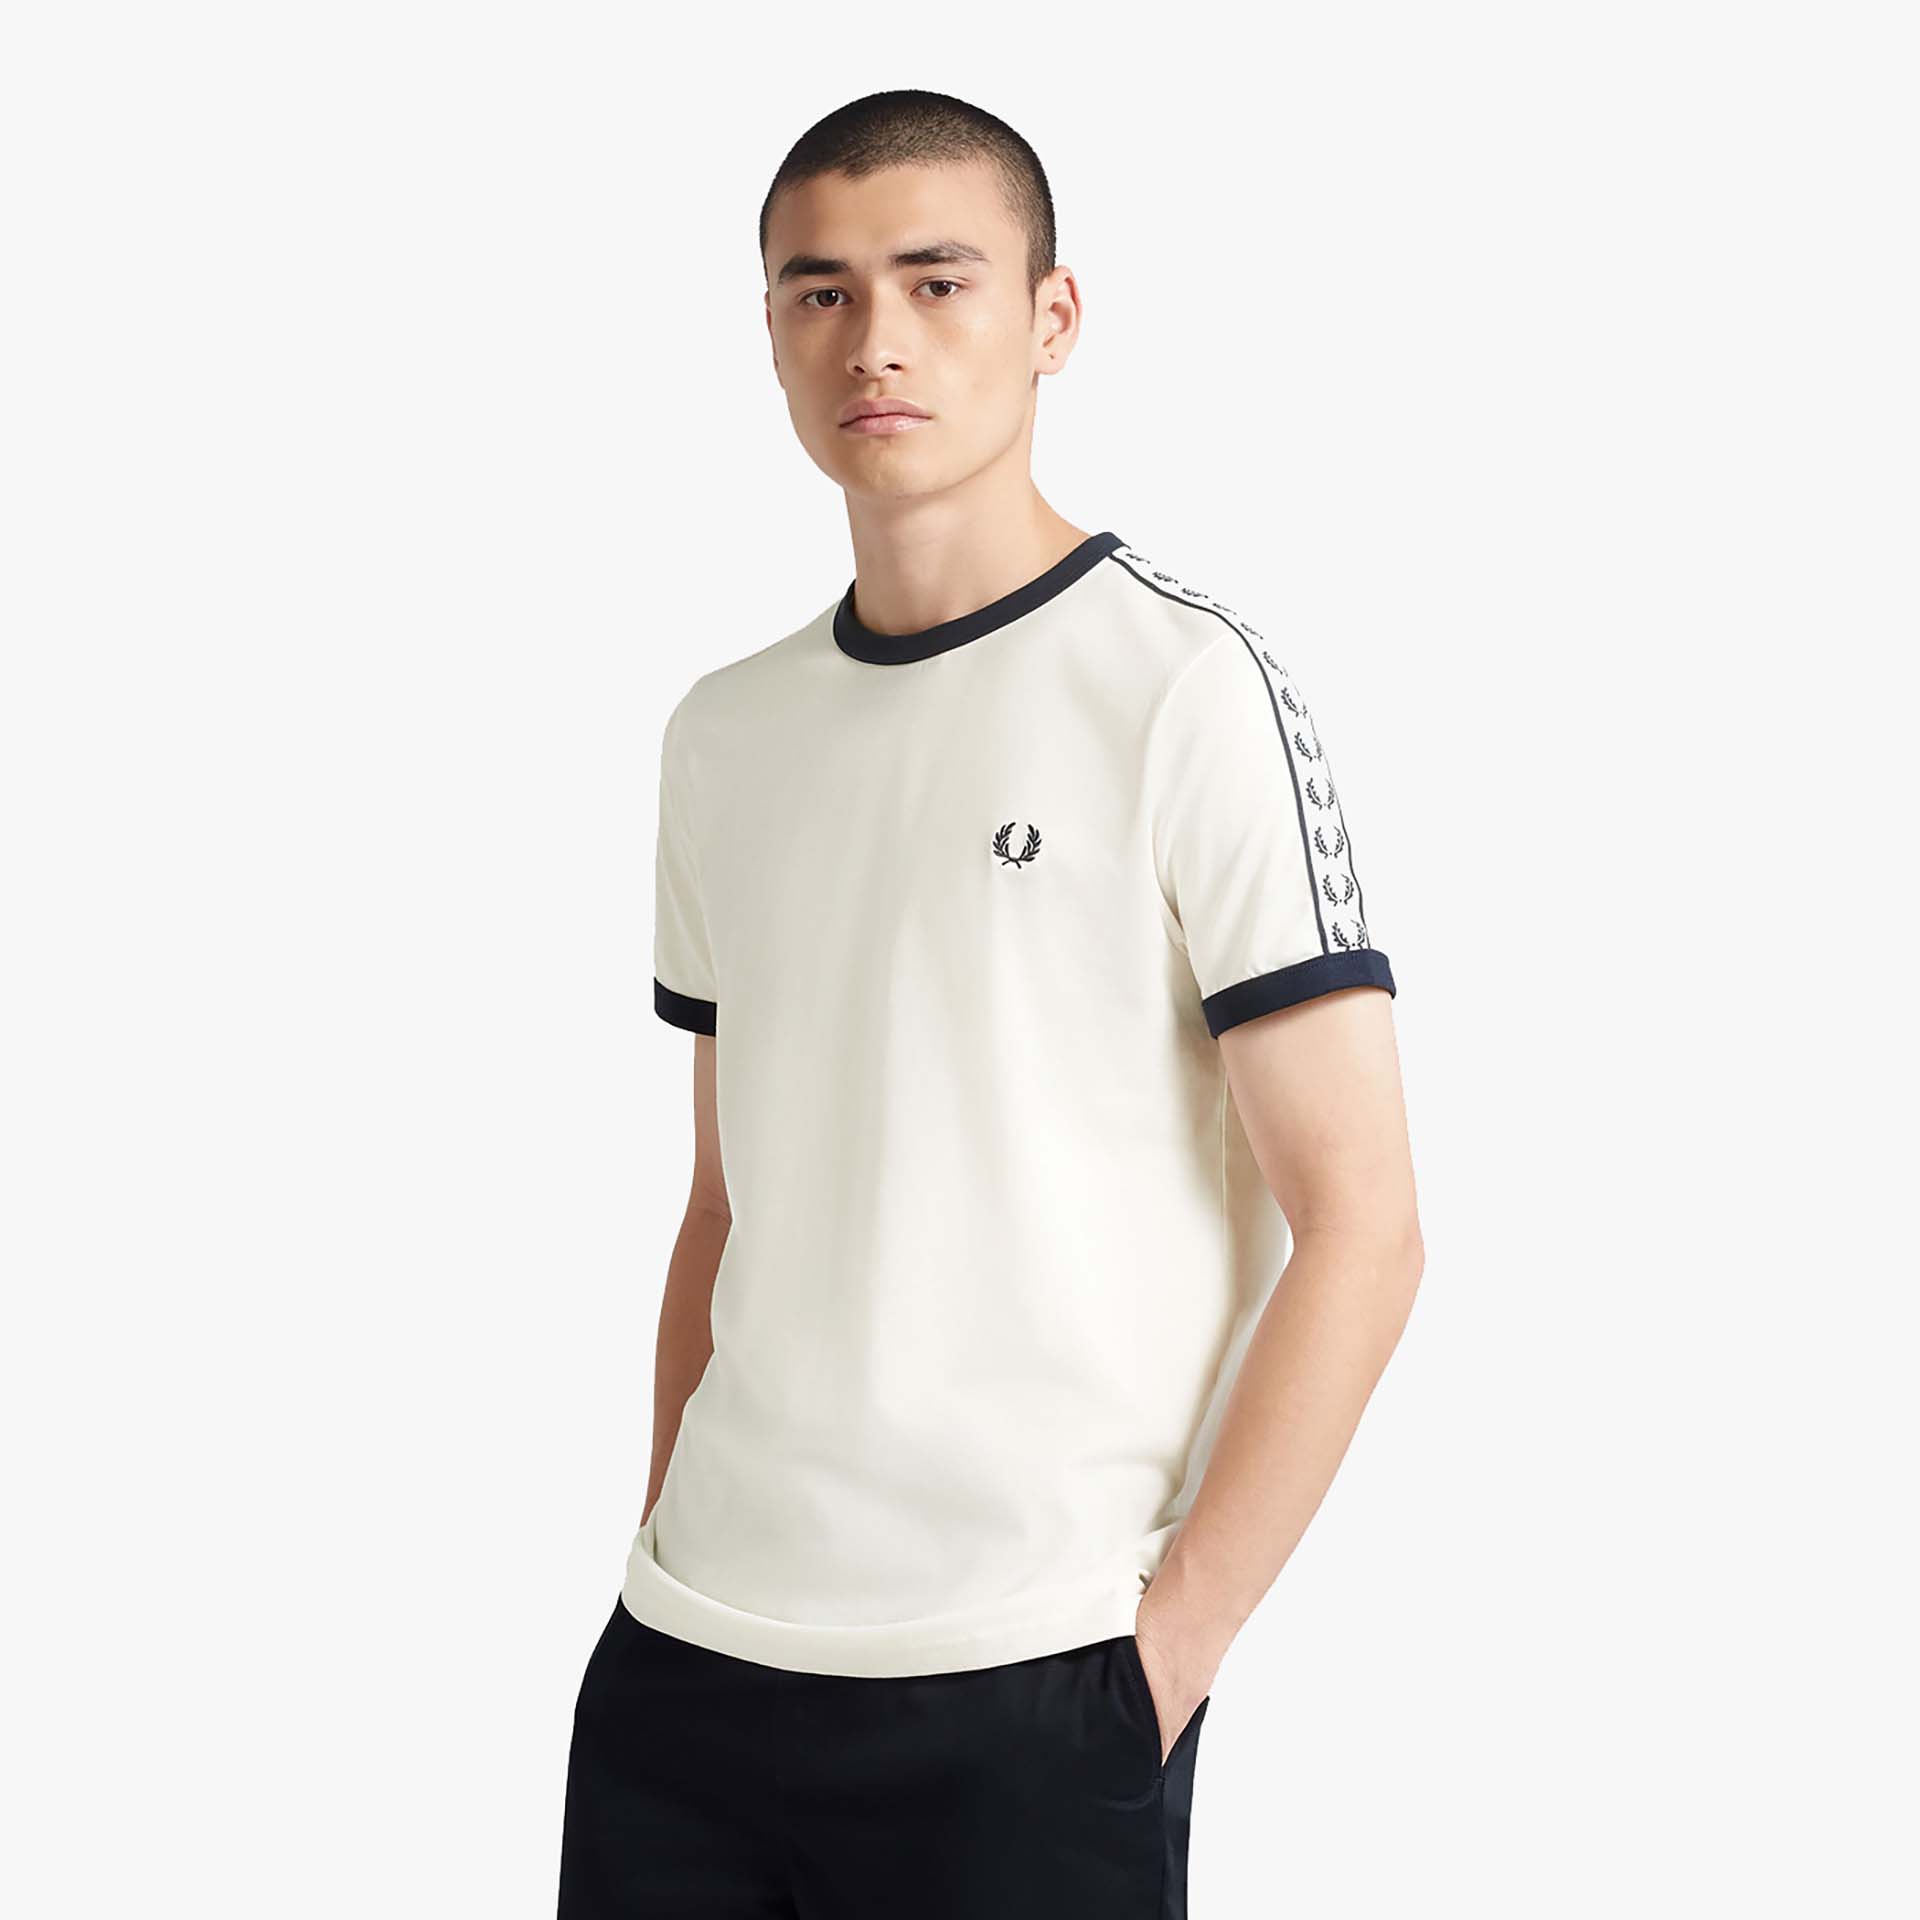 Fred Perry Taped Ringer T-Shirt Snow White